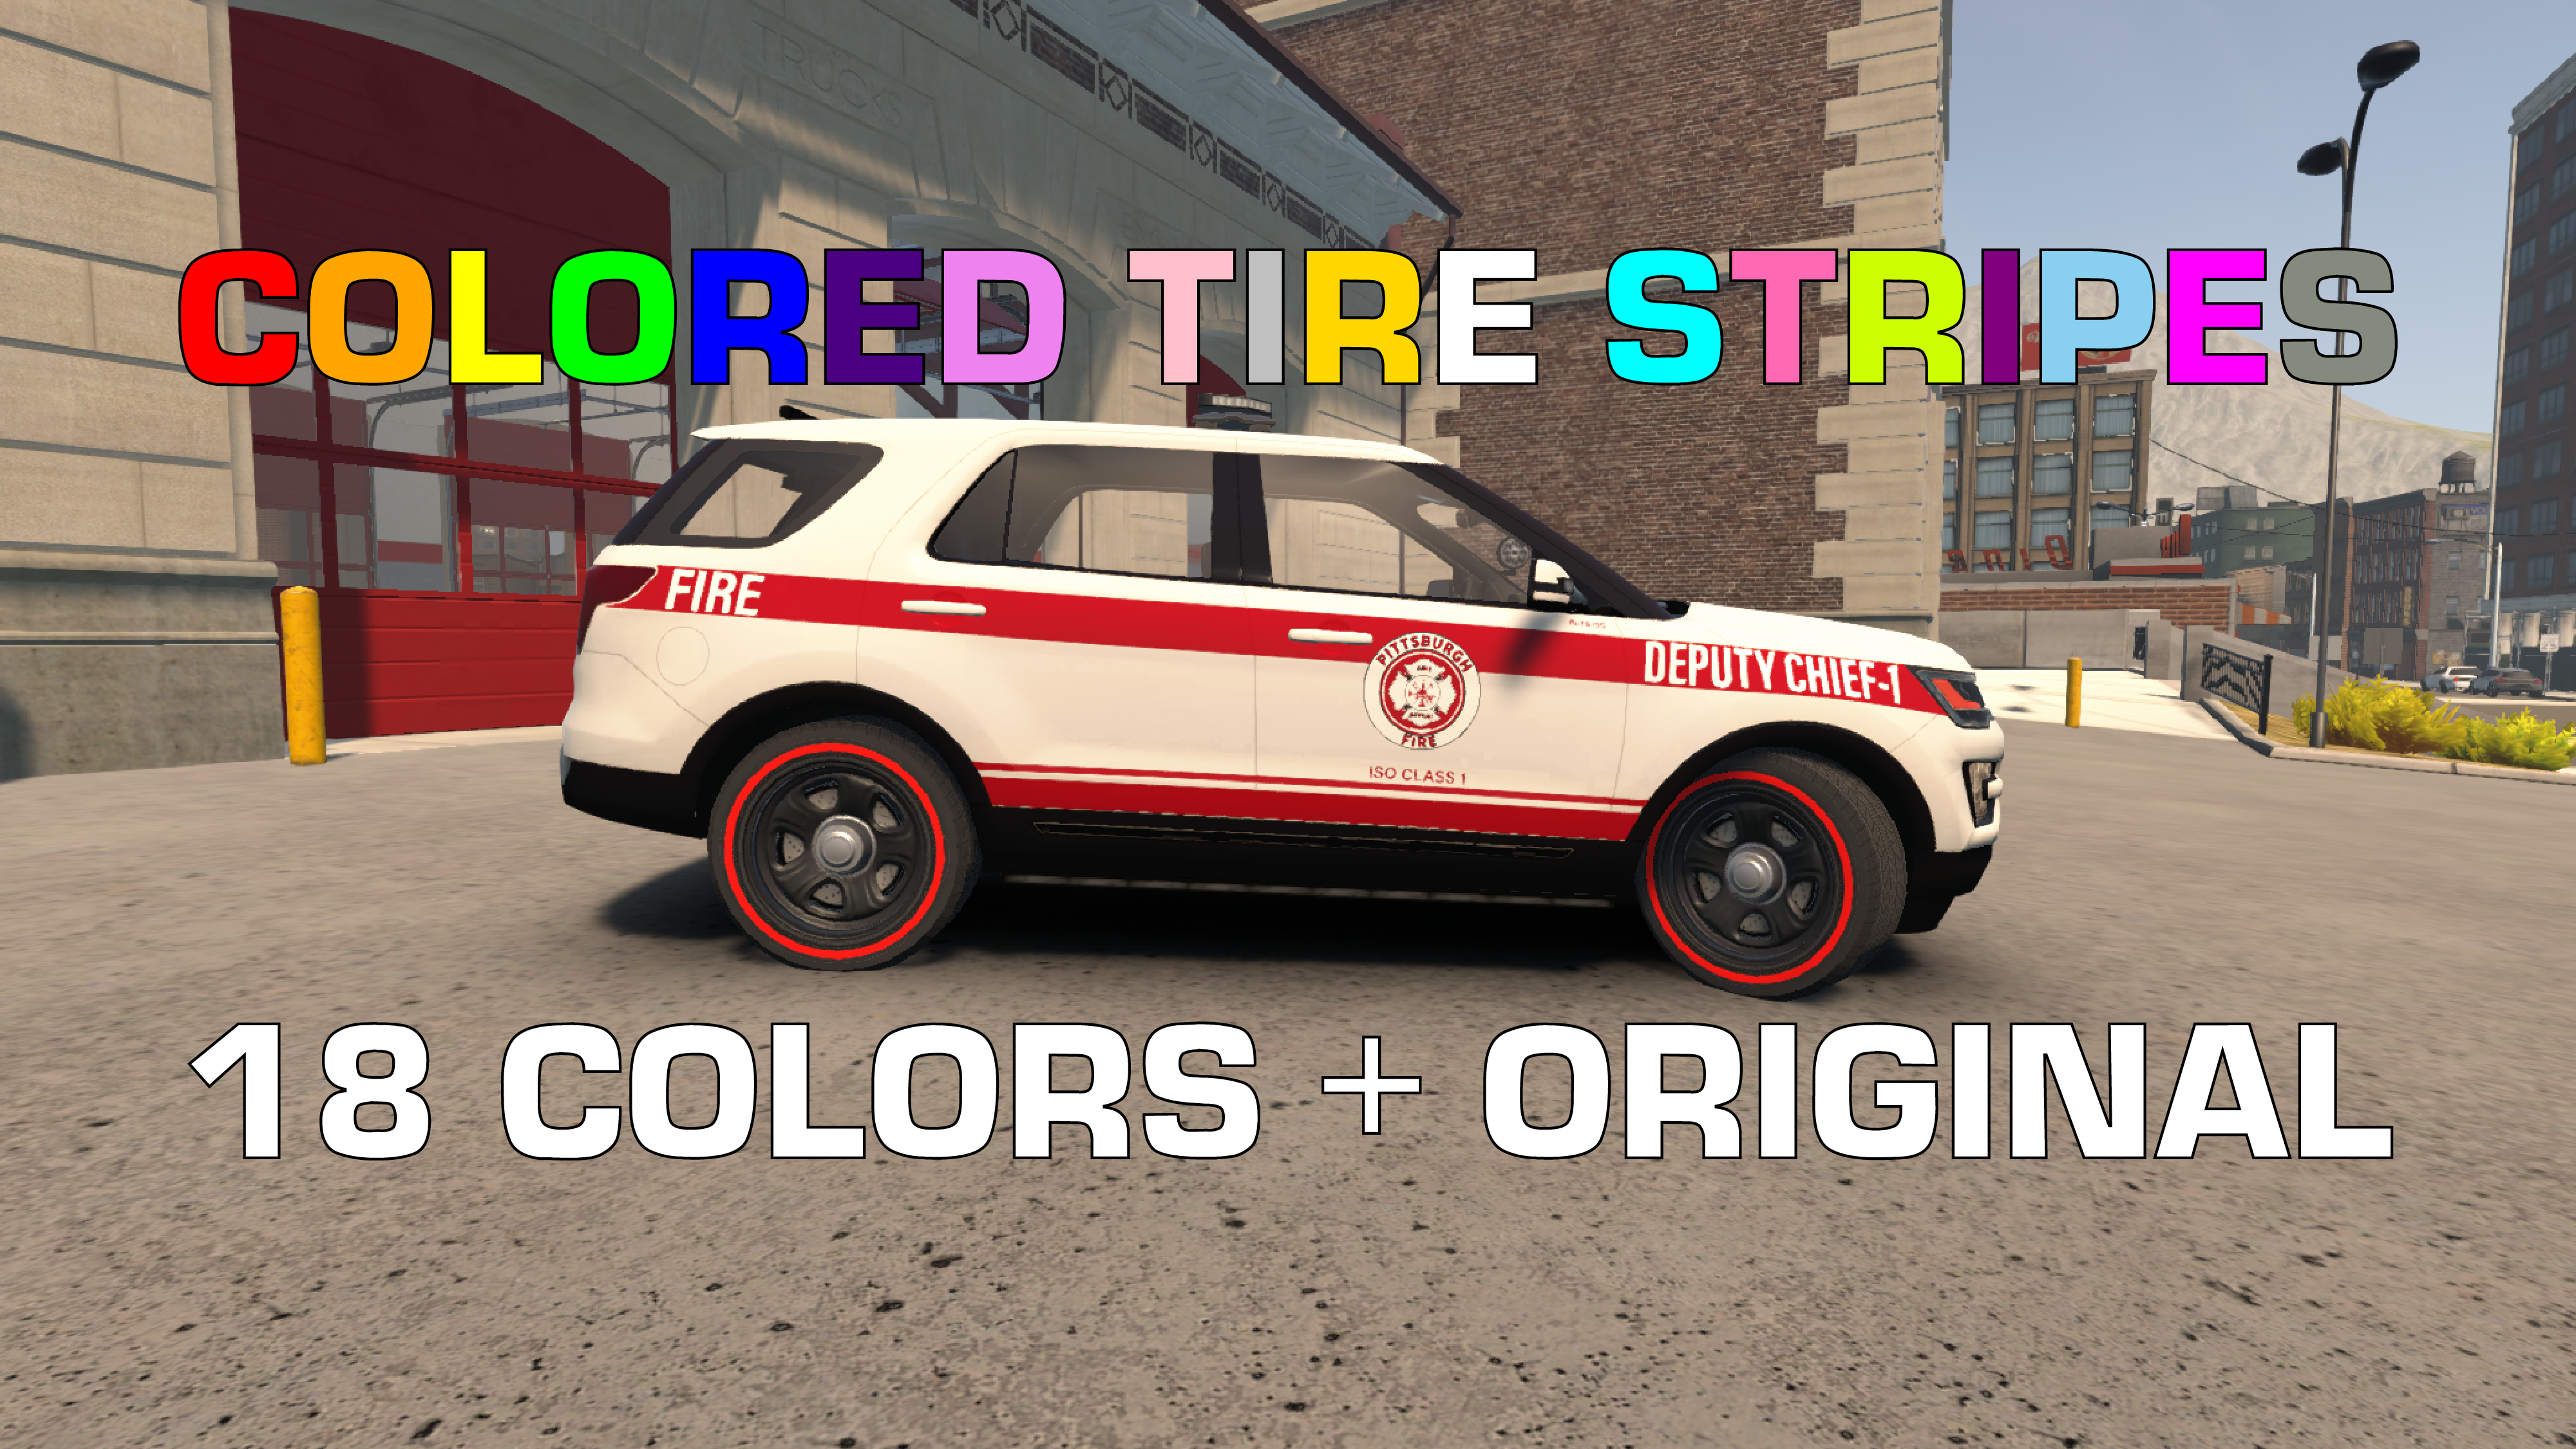 More information about "Colored Tire Stripes - Explorers & Chargers"